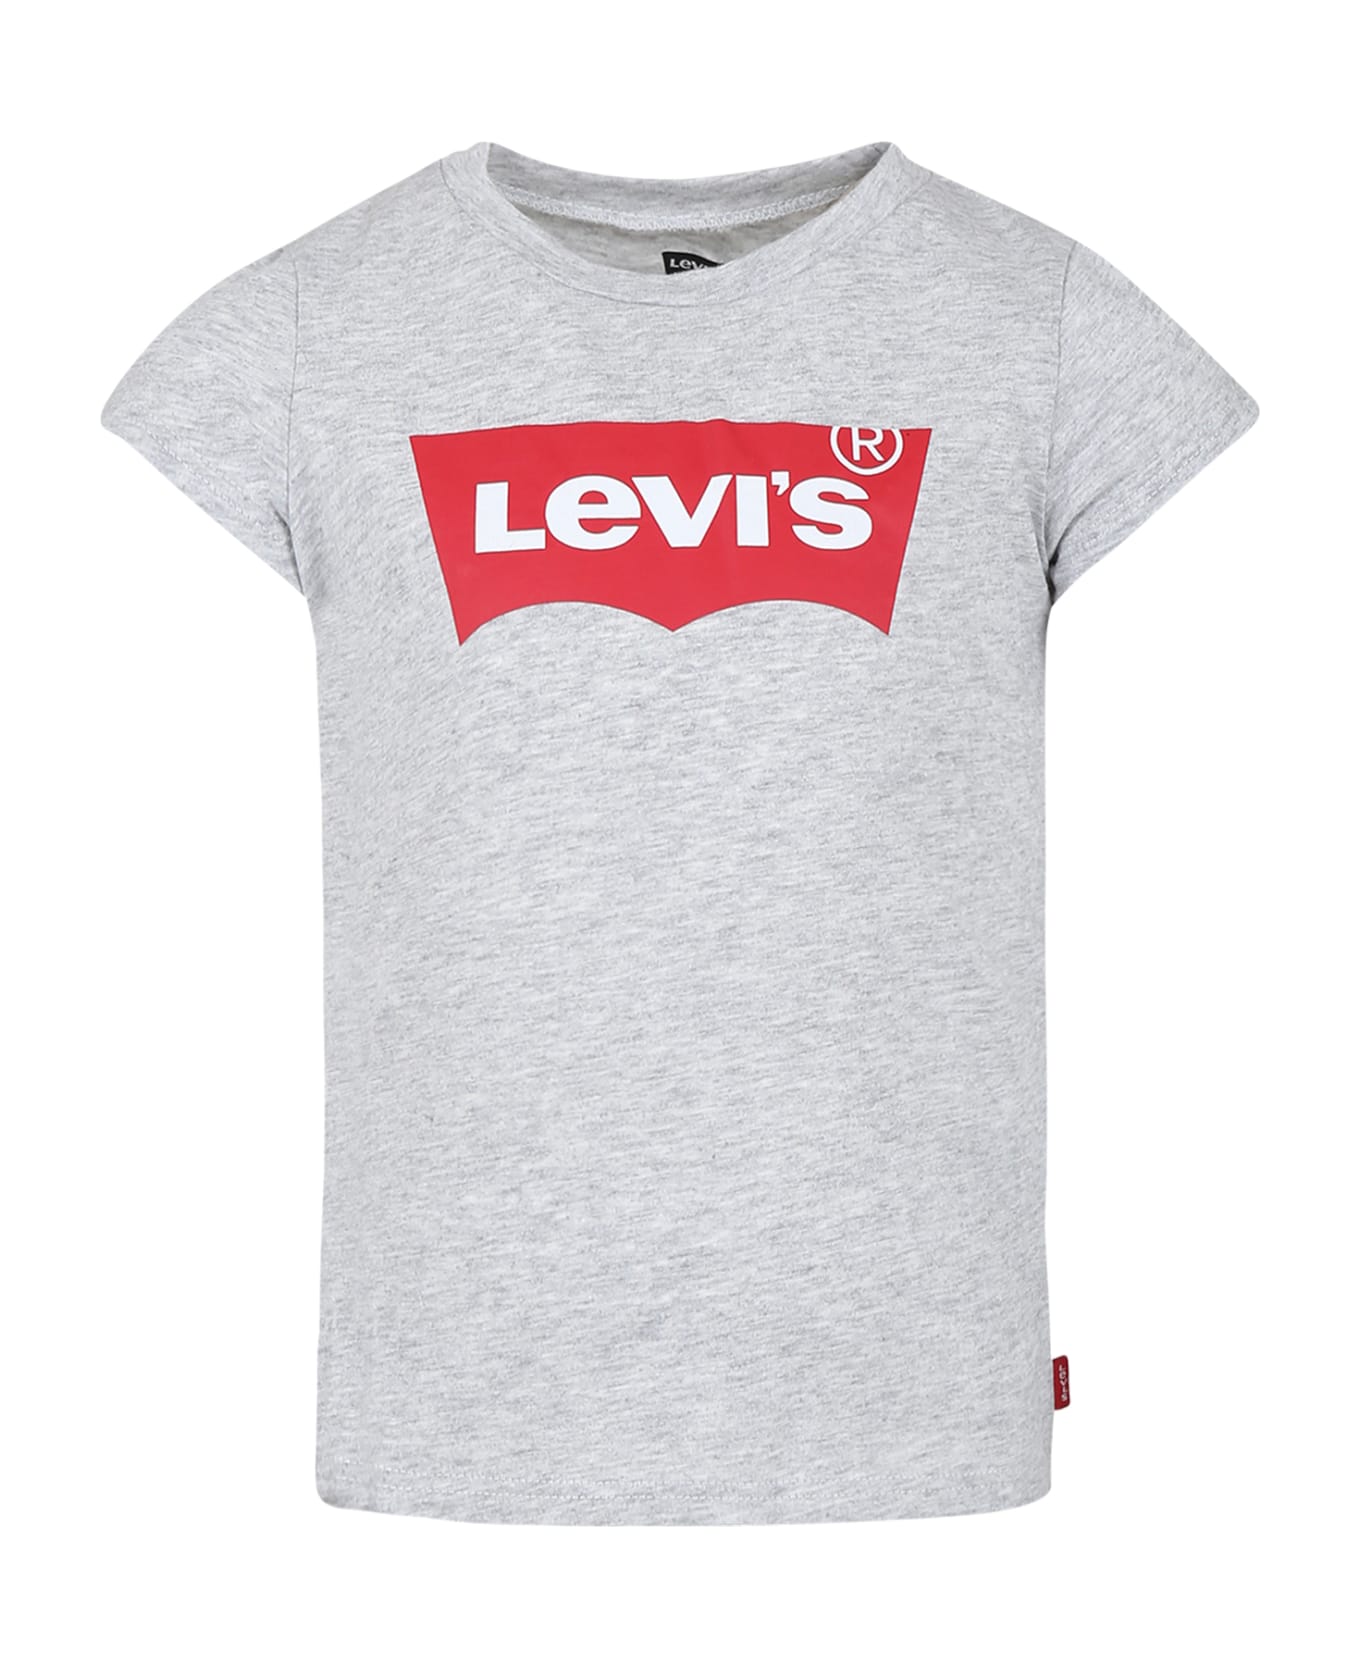 Levi's Grey T-shirt For Girl With Logo - Grey